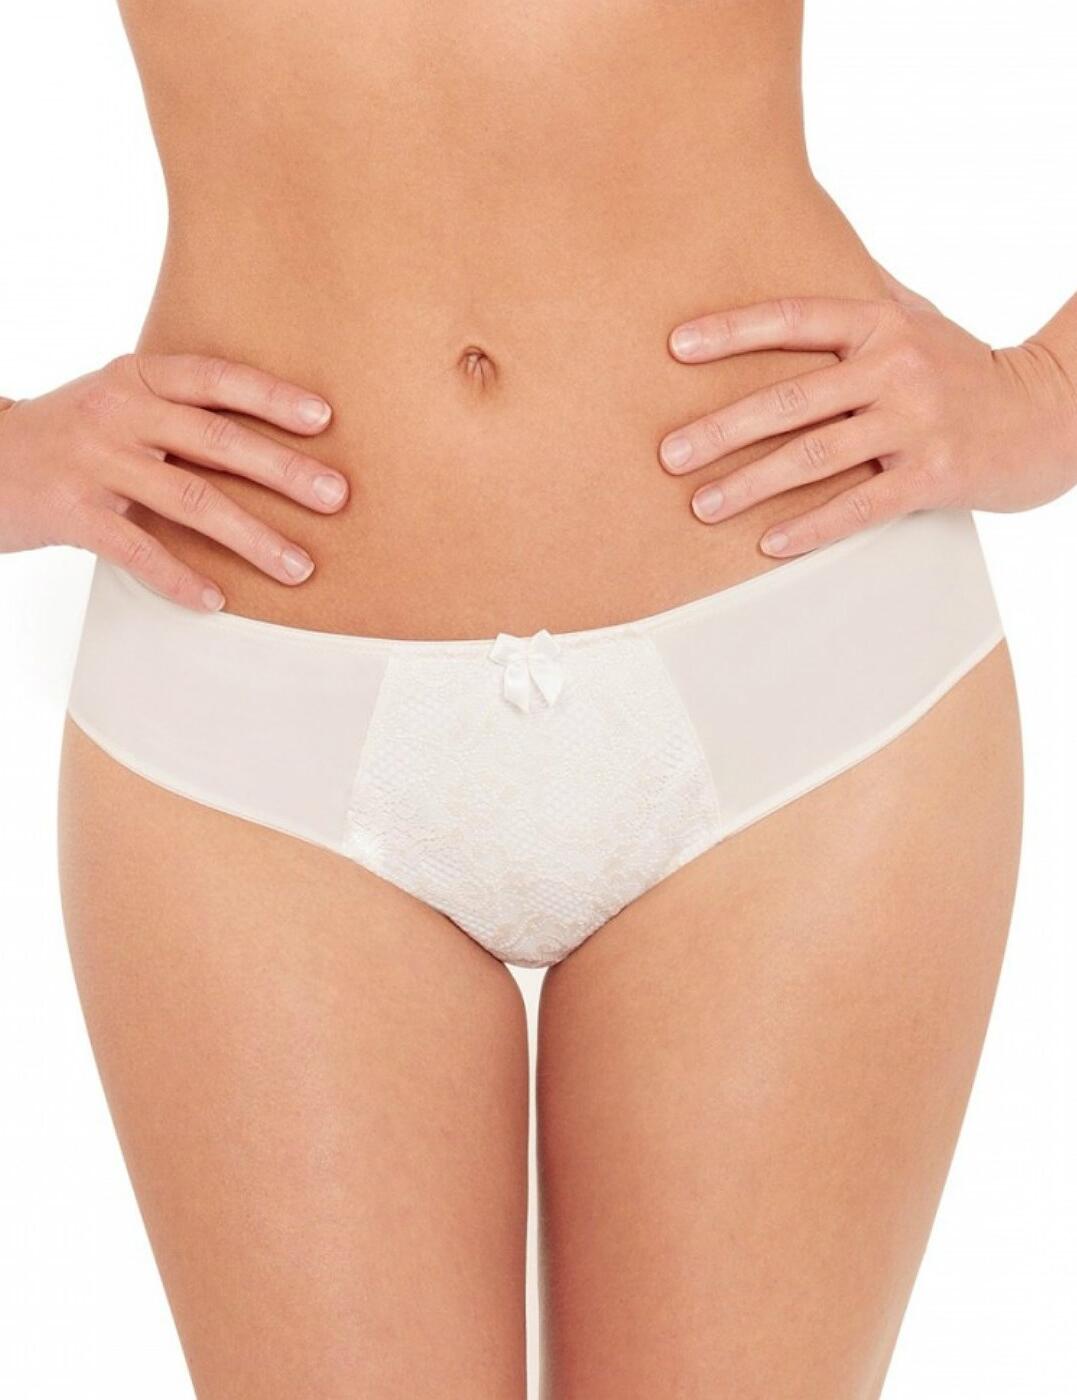 1505100 Charnos Superfit Lace Brief - 1505100 Ivory